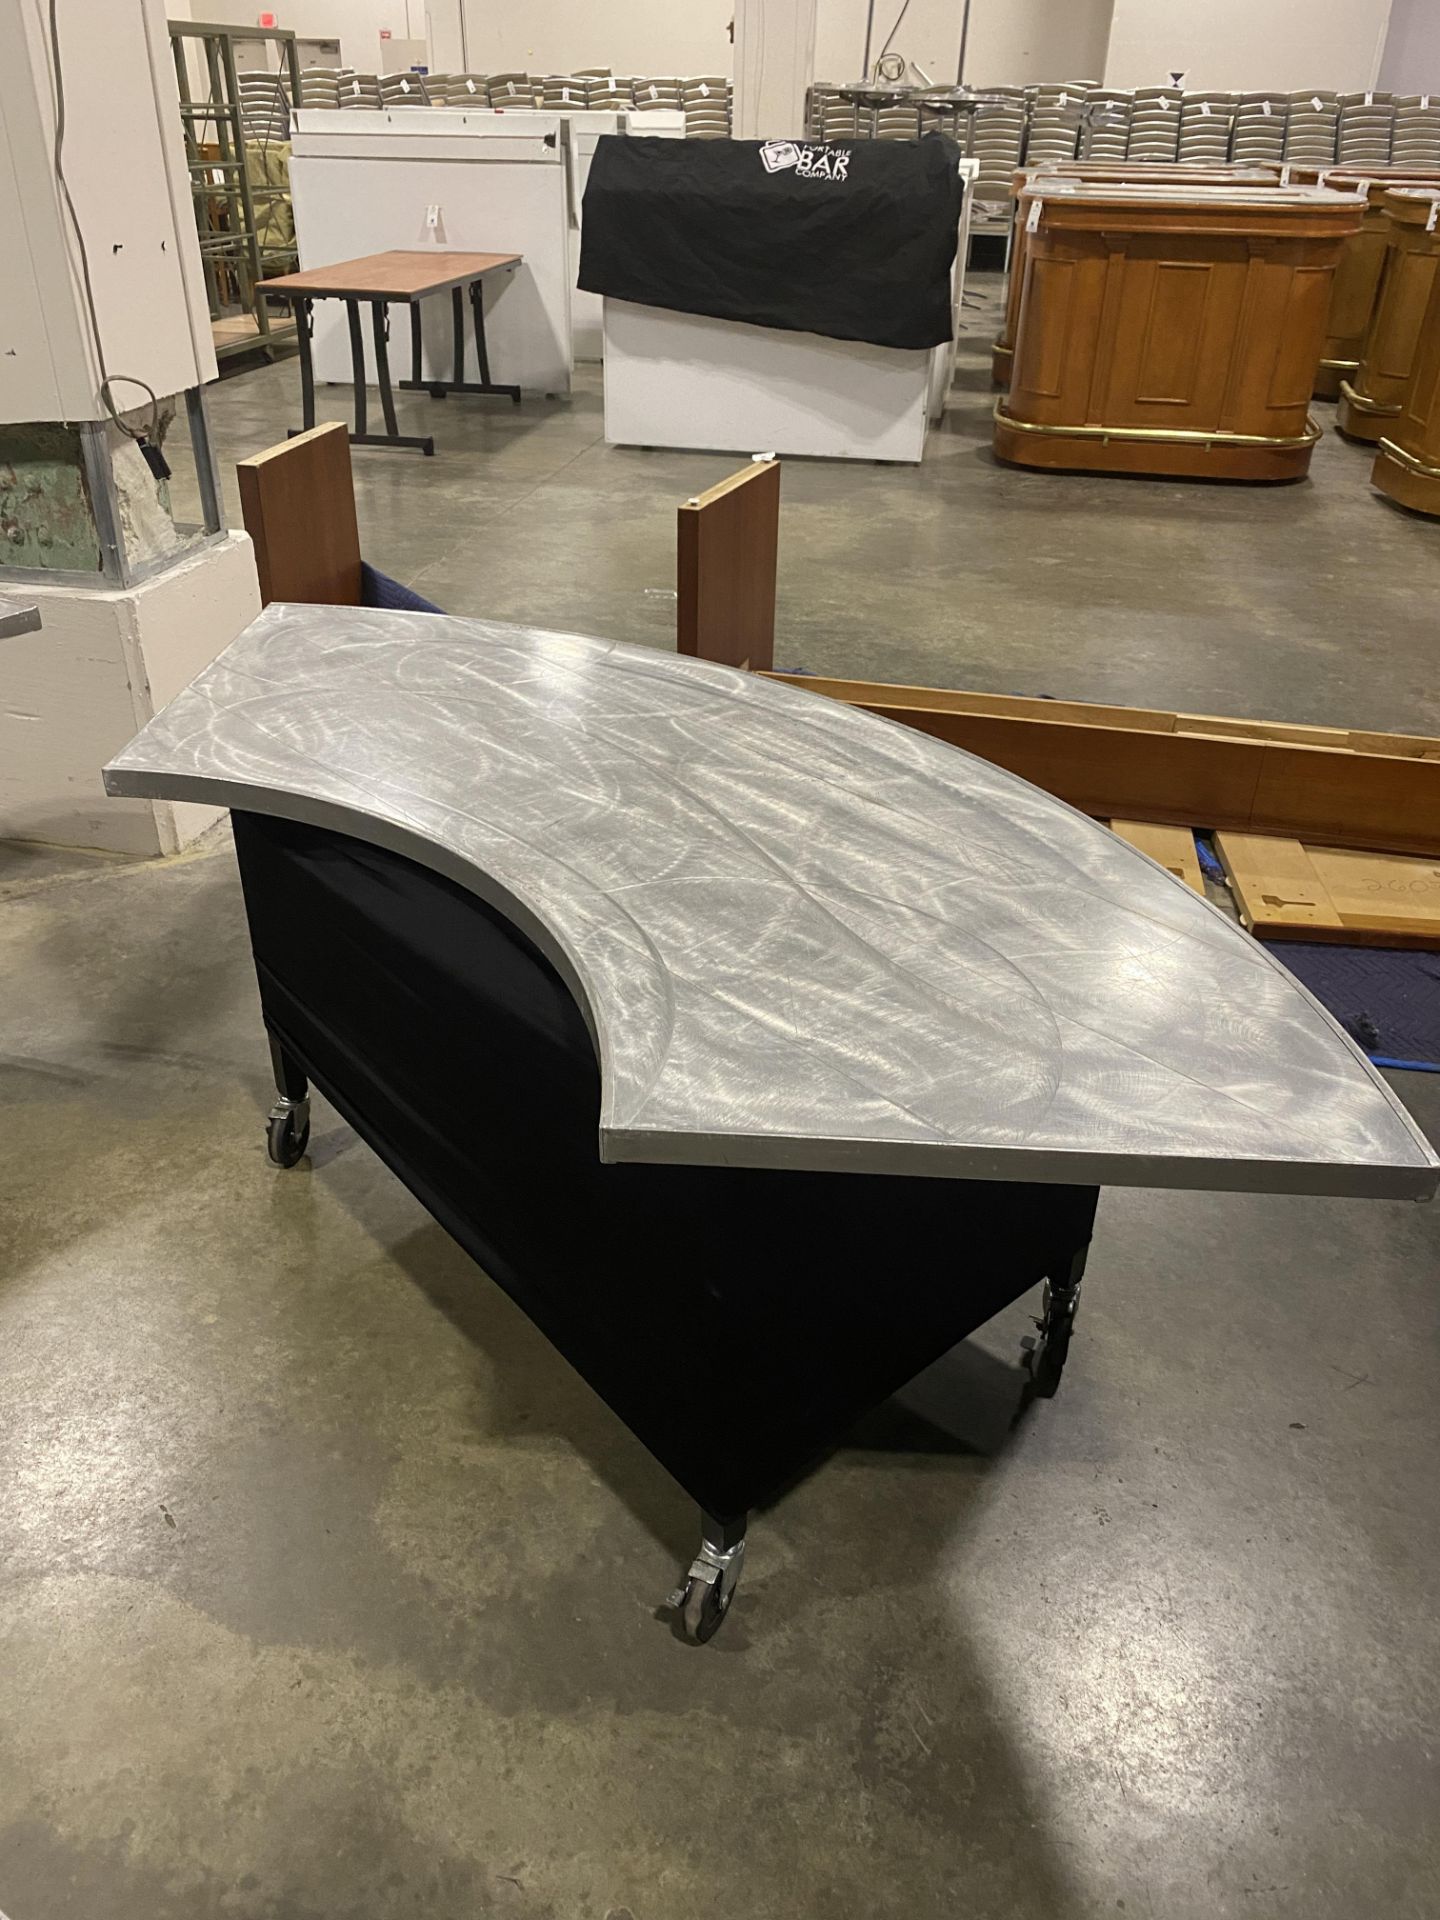 (4) Southern Aluminum Approx. 72" Serpentine Portable Swirl Top Folding Table Integral Spandex Skirt